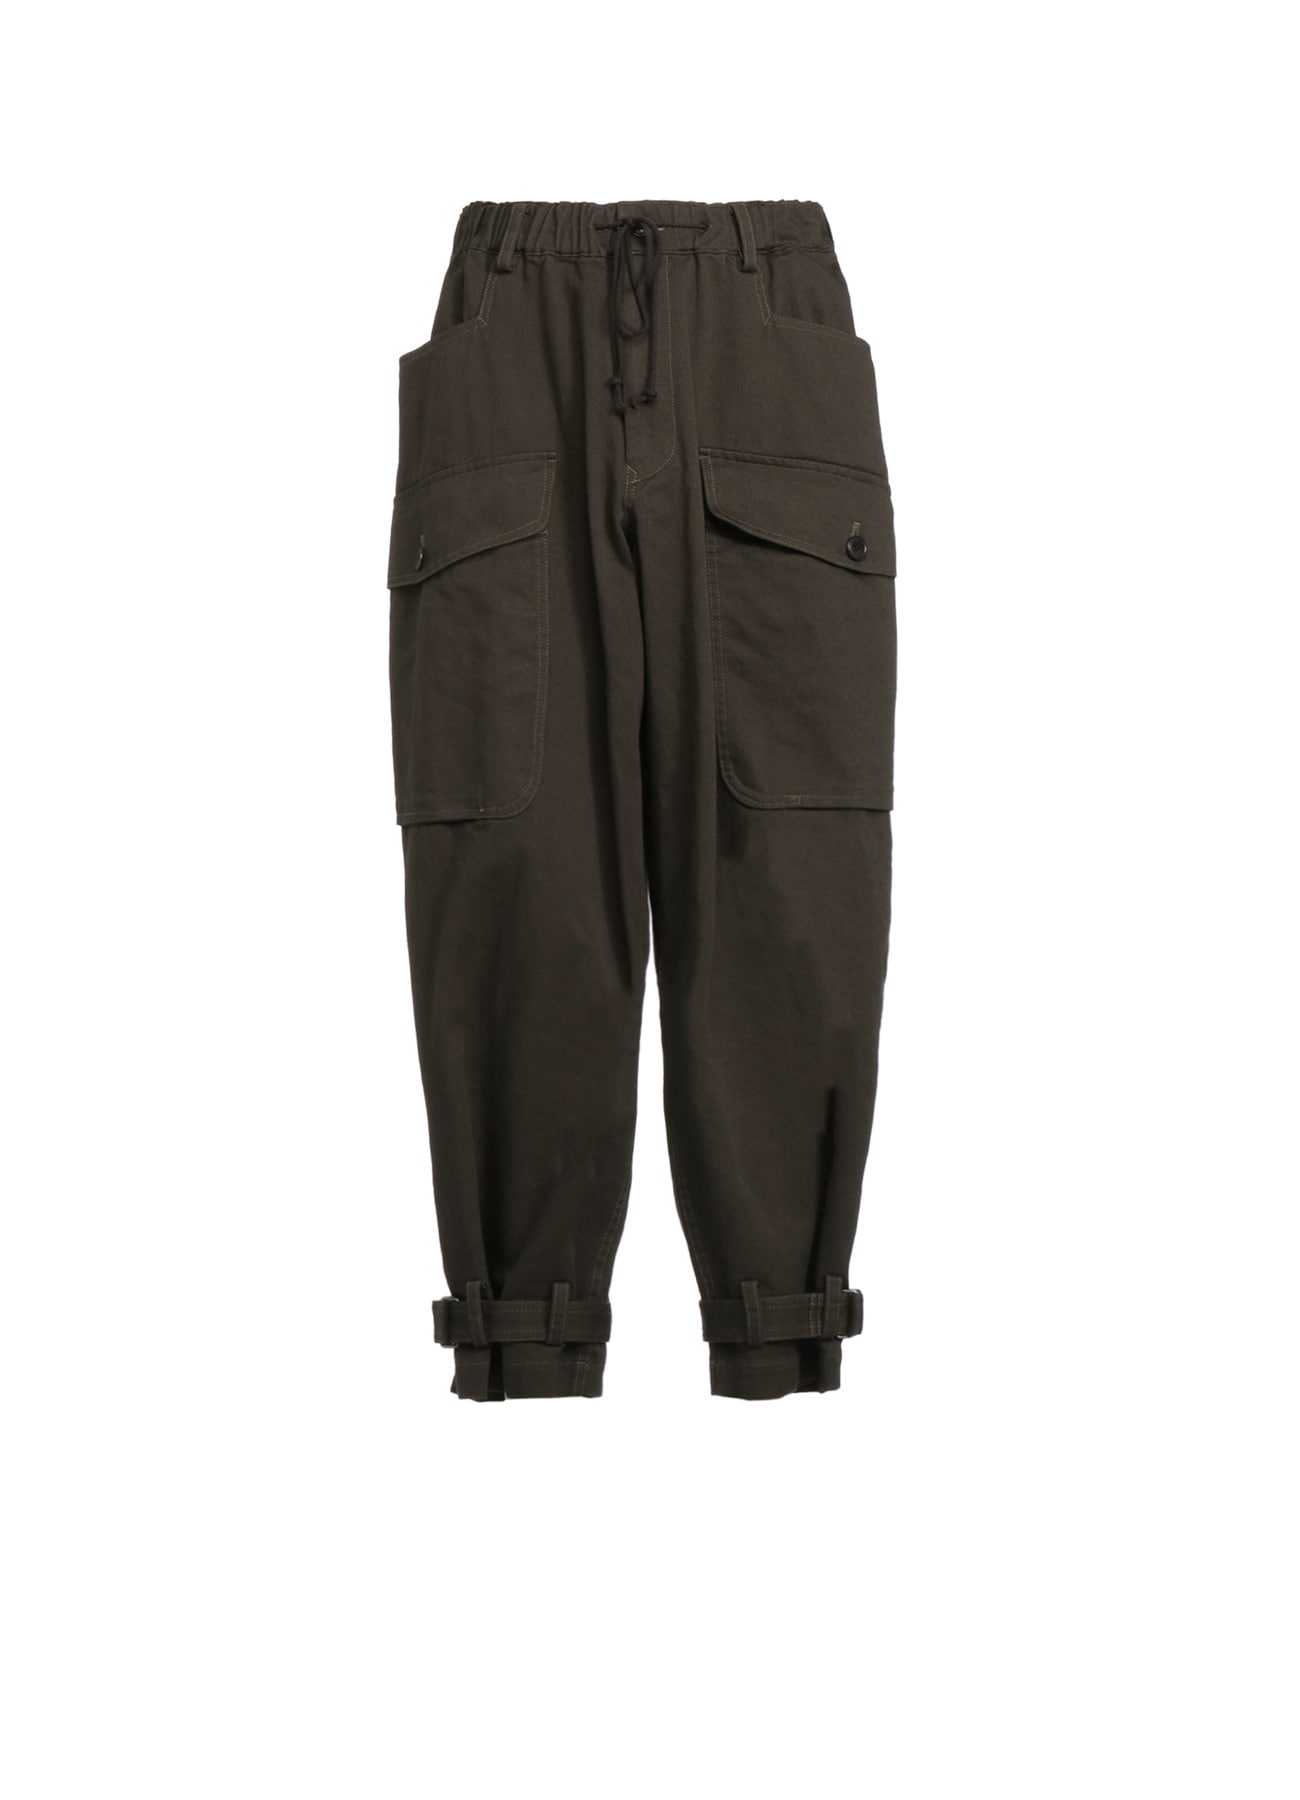 COTTON DRILL CARGO PANTS WITH BELTED HEMS(M Black): S ...